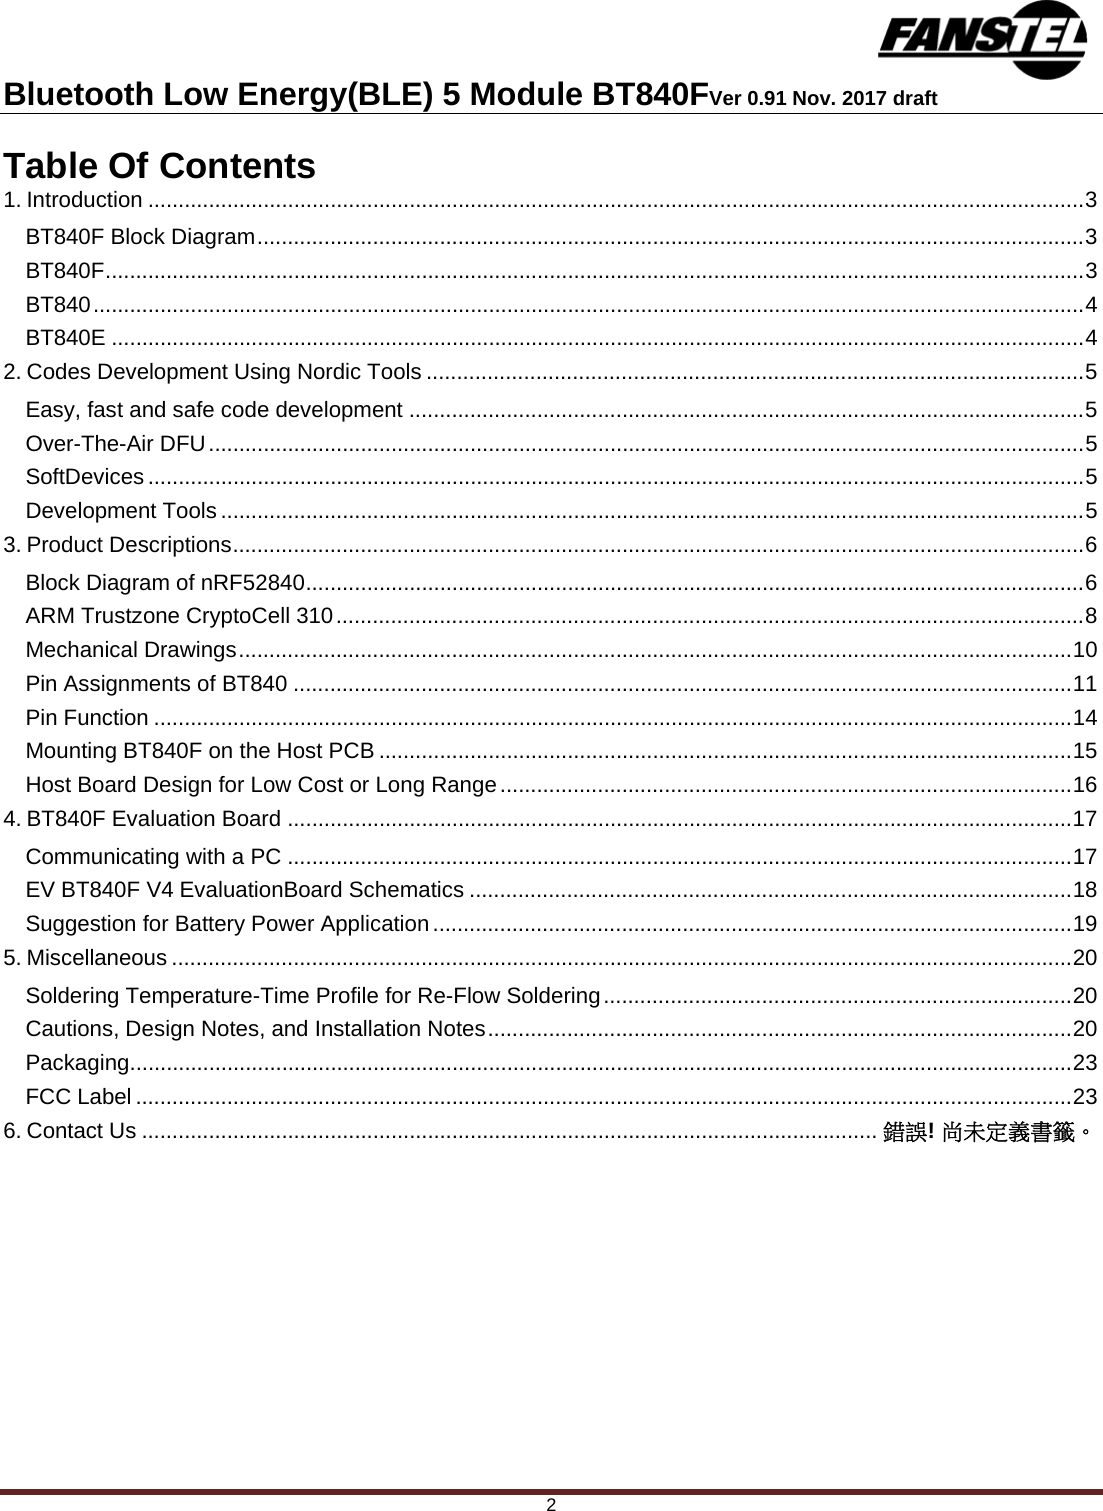 Bluetooth Low Energy(BLE) 5 Module BT840FVer 0.91 Nov. 2017 draft 2 Table Of Contents 1. Introduction .......................................................................................................................................................... 3 BT840F Block Diagram ........................................................................................................................................ 3 BT840F ................................................................................................................................................................. 3 BT840 ................................................................................................................................................................... 4 BT840E ................................................................................................................................................................ 4 2. Codes Development Using Nordic Tools ............................................................................................................ 5 Easy, fast and safe code development ............................................................................................................... 5 Over-The-Air DFU ................................................................................................................................................ 5 SoftDevices .......................................................................................................................................................... 5 Development Tools .............................................................................................................................................. 5 3. Product Descriptions ............................................................................................................................................ 6 Block Diagram of nRF52840 ................................................................................................................................ 6 ARM Trustzone CryptoCell 310 ........................................................................................................................... 8 Mechanical Drawings ......................................................................................................................................... 10 Pin Assignments of BT840 ................................................................................................................................ 11 Pin Function ....................................................................................................................................................... 14 Mounting BT840F on the Host PCB .................................................................................................................. 15 Host Board Design for Low Cost or Long Range .............................................................................................. 16 4. BT840F Evaluation Board ................................................................................................................................. 17 Communicating with a PC ................................................................................................................................. 17 EV BT840F V4 EvaluationBoard Schematics ................................................................................................... 18 Suggestion for Battery Power Application ......................................................................................................... 19 5. Miscellaneous .................................................................................................................................................... 20 Soldering Temperature-Time Profile for Re-Flow Soldering ............................................................................. 20 Cautions, Design Notes, and Installation Notes ................................................................................................ 20 Packaging ........................................................................................................................................................... 23 FCC Label .......................................................................................................................................................... 23 6. Contact Us ......................................................................................................................... 錯誤! 尚未定義書籤。   